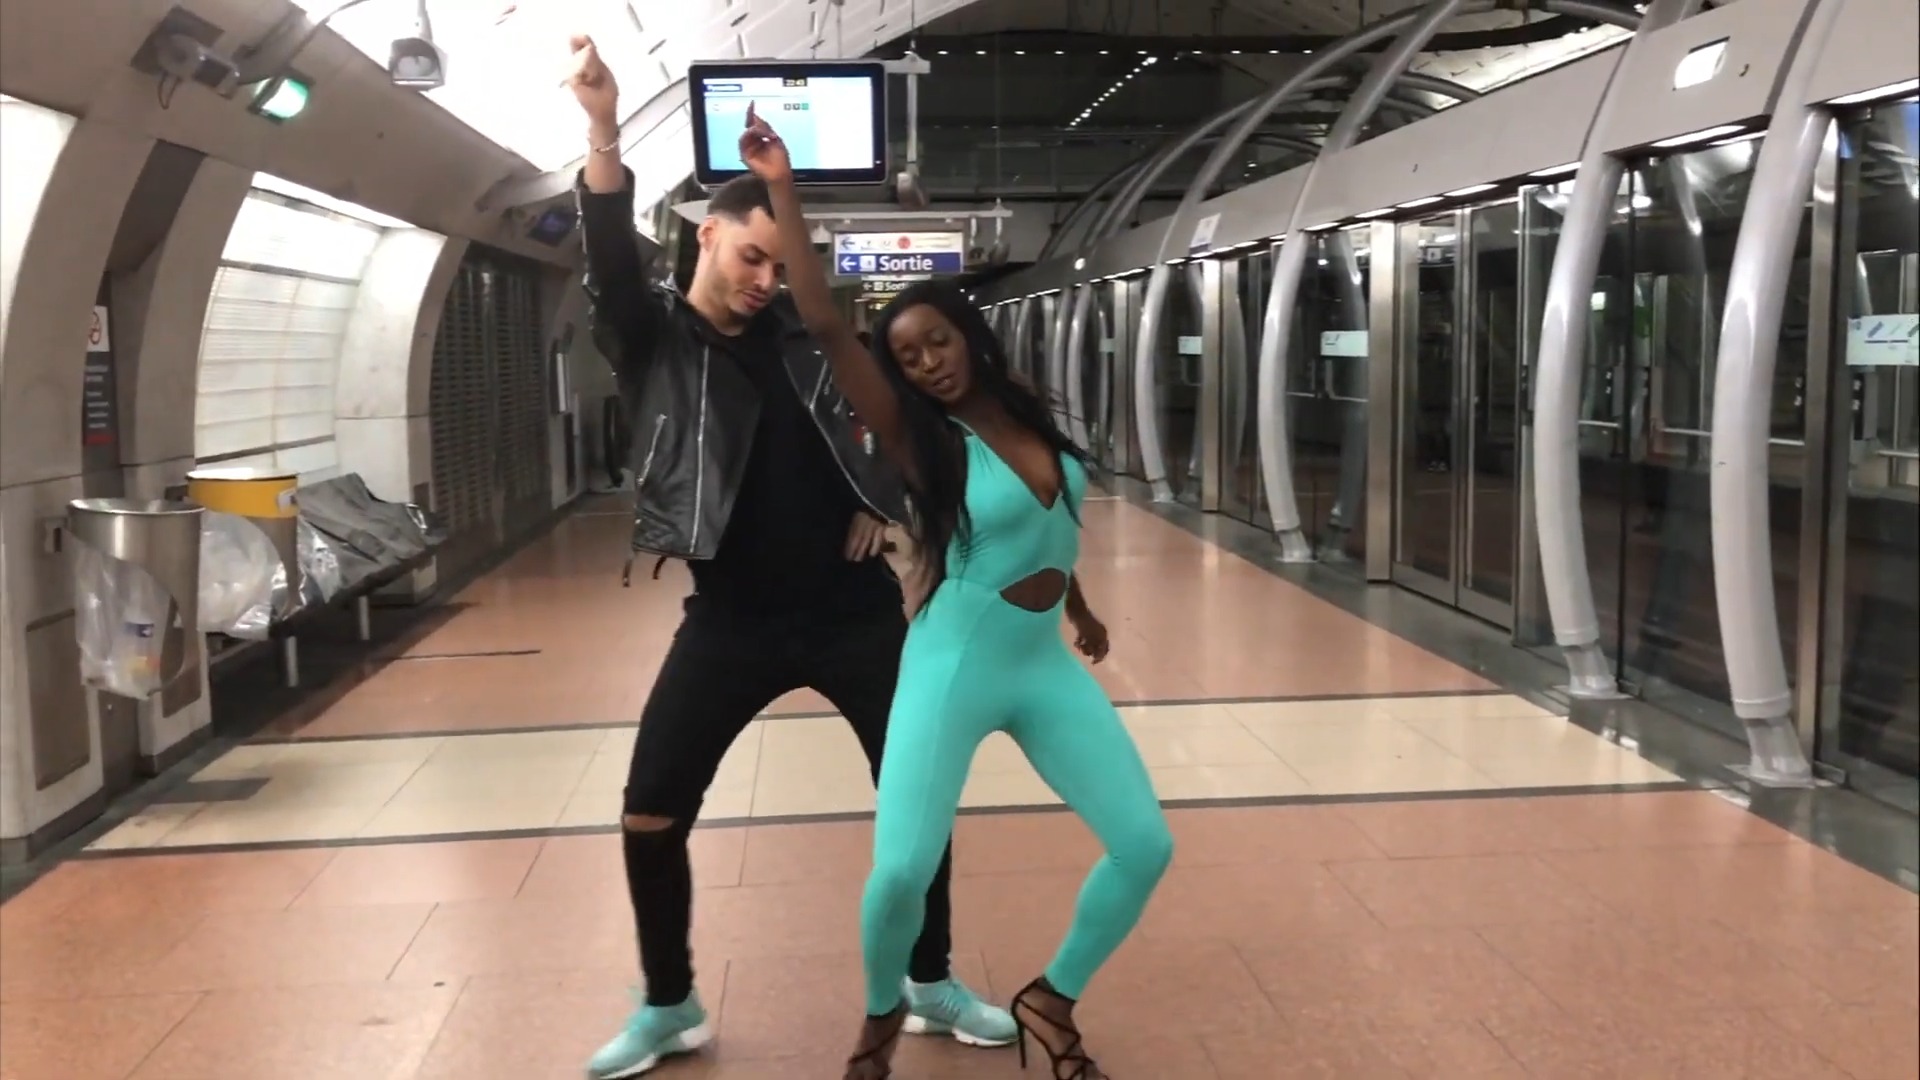 White man and black woman dancing in public in a subway station